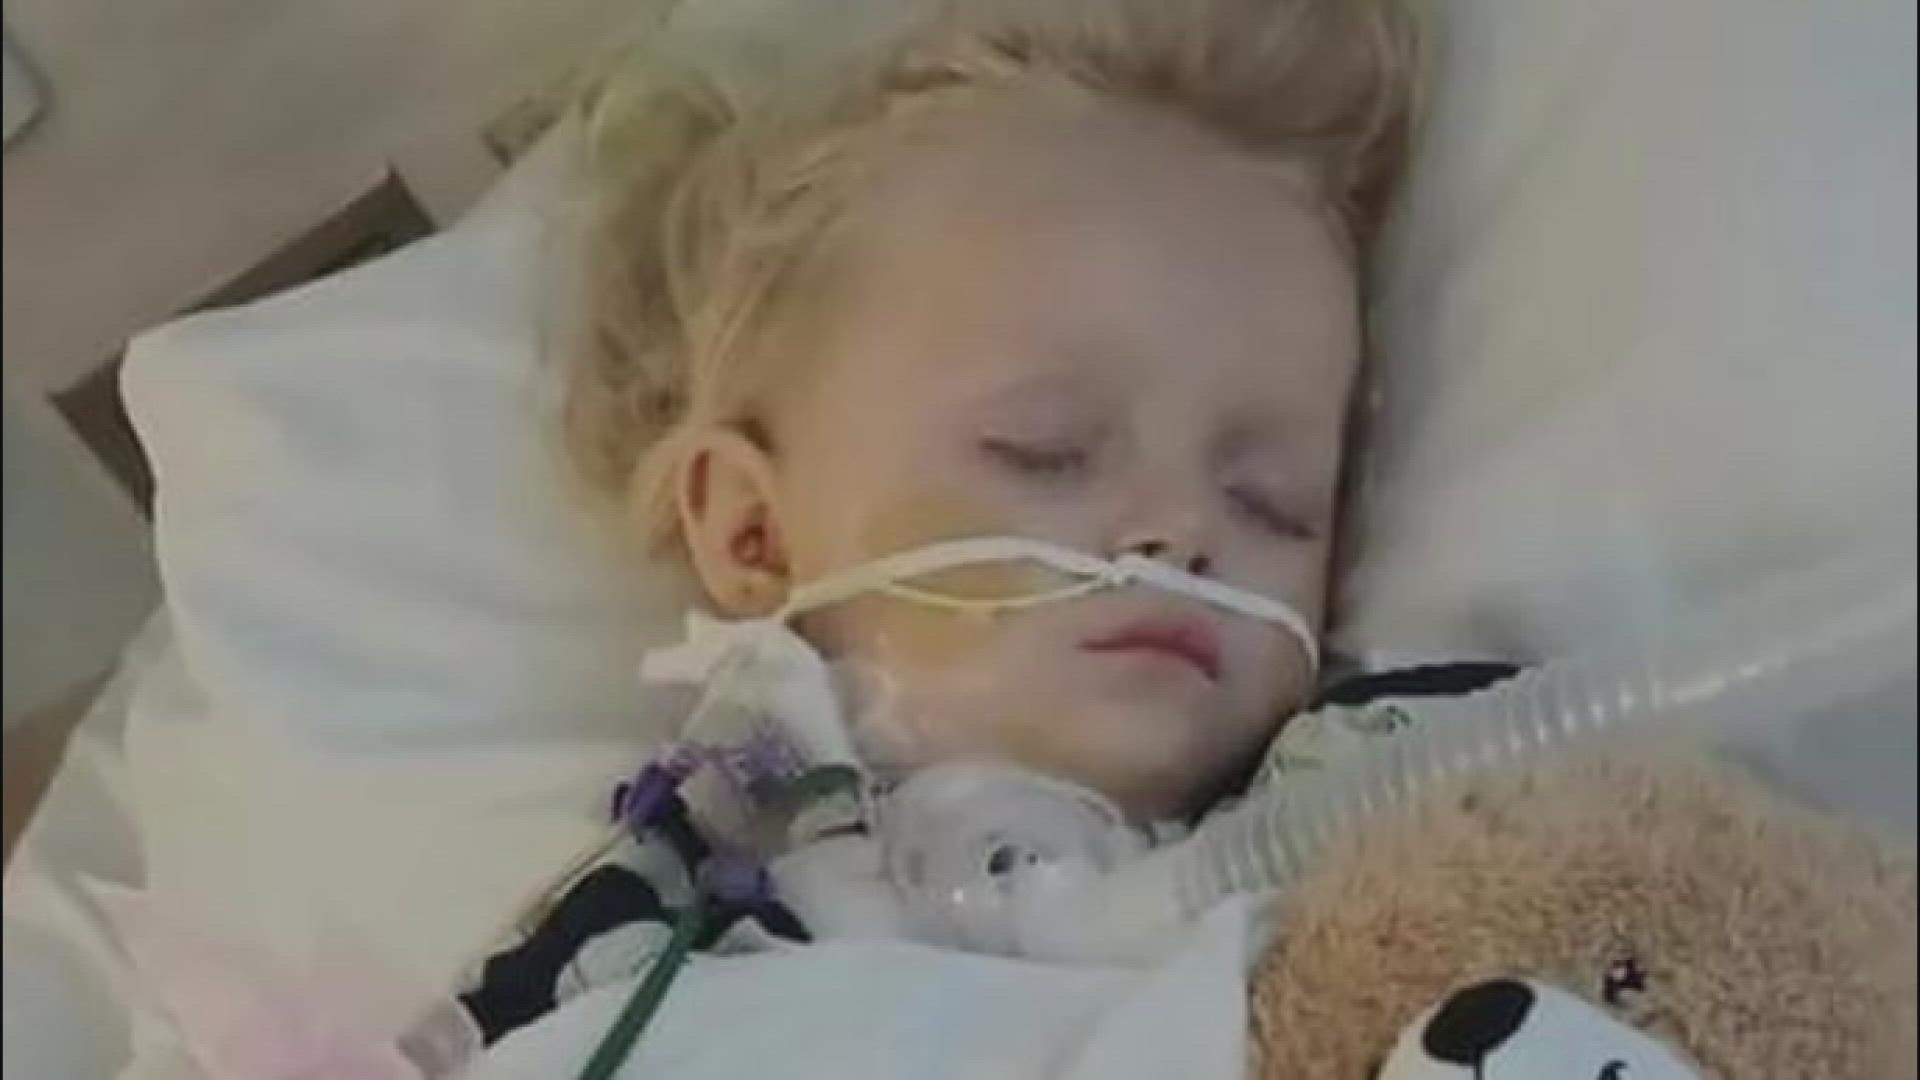 The 5-year-old girl is recovering in the hospital due to a dog bite to her neck that happened at a New Year's Eve celebration.